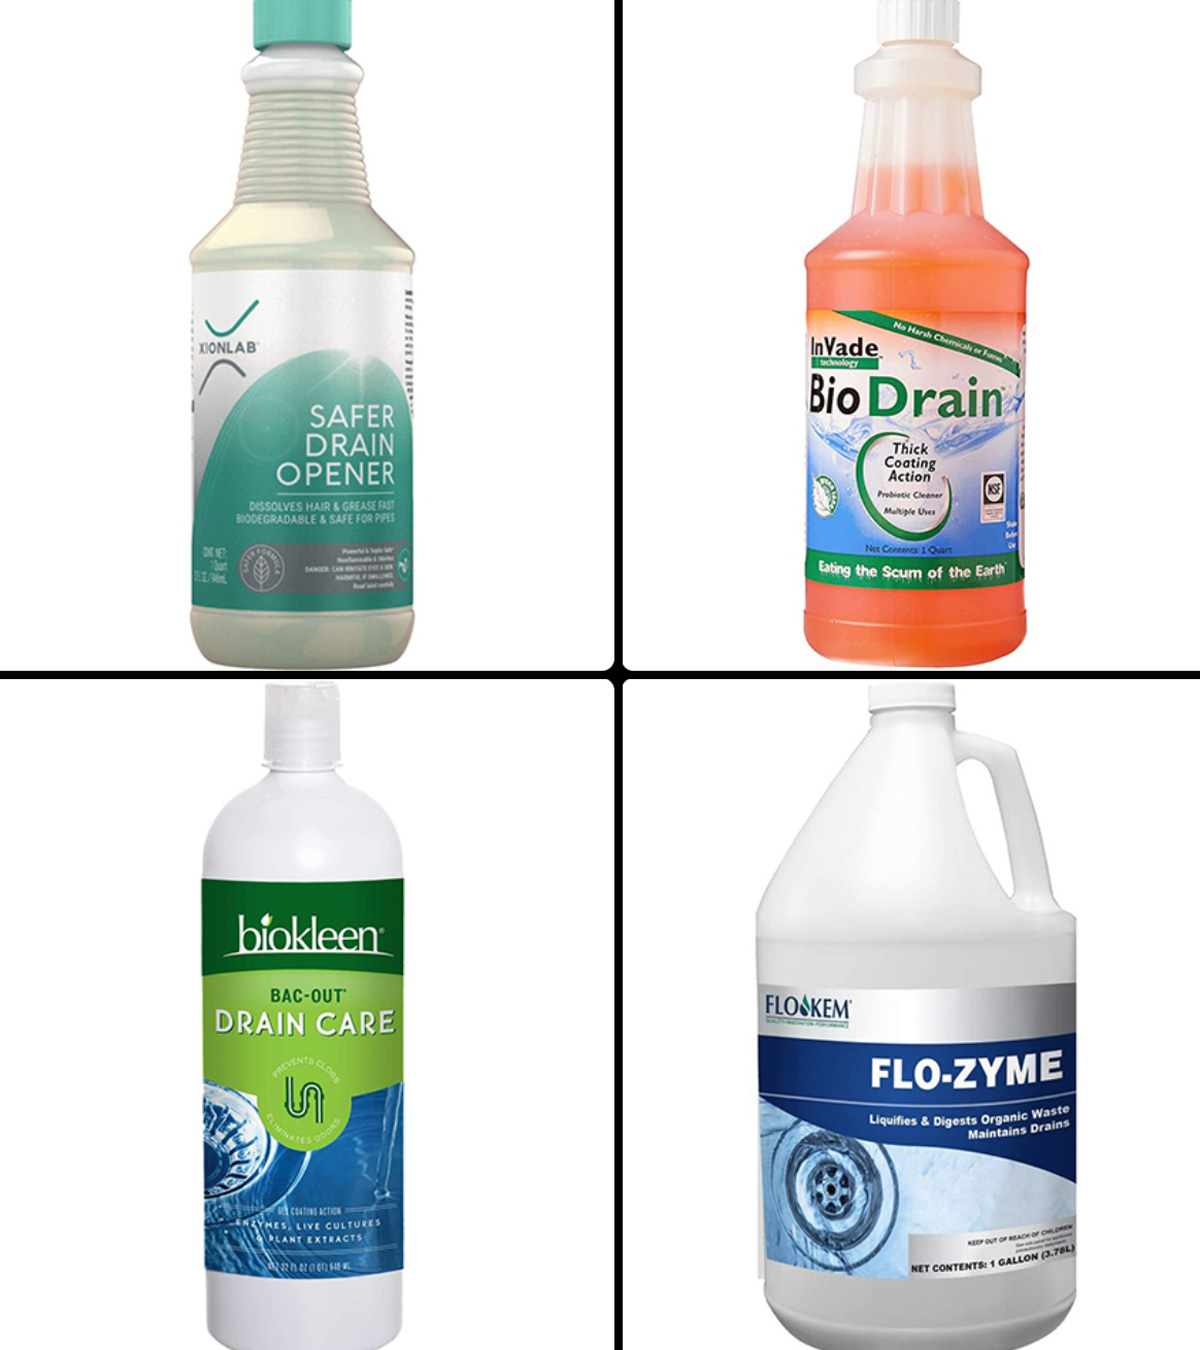 https://www.momjunction.com/wp-content/uploads/2021/02/Best-Drain-Cleaners-In-For-Clogged-Sink.jpg